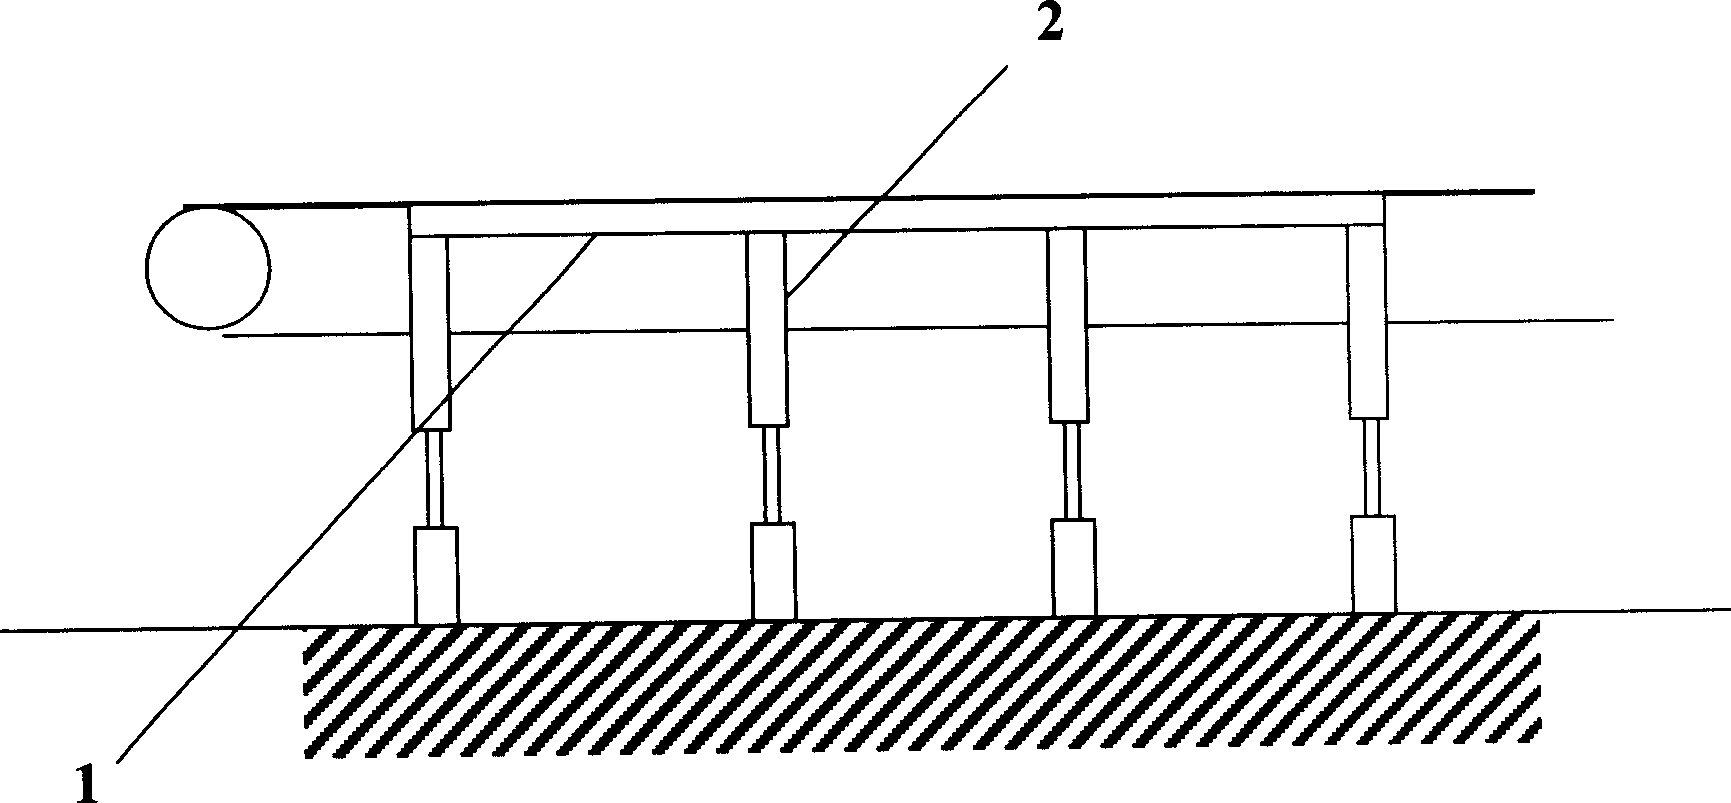 Support for transfering material by conveyer belt